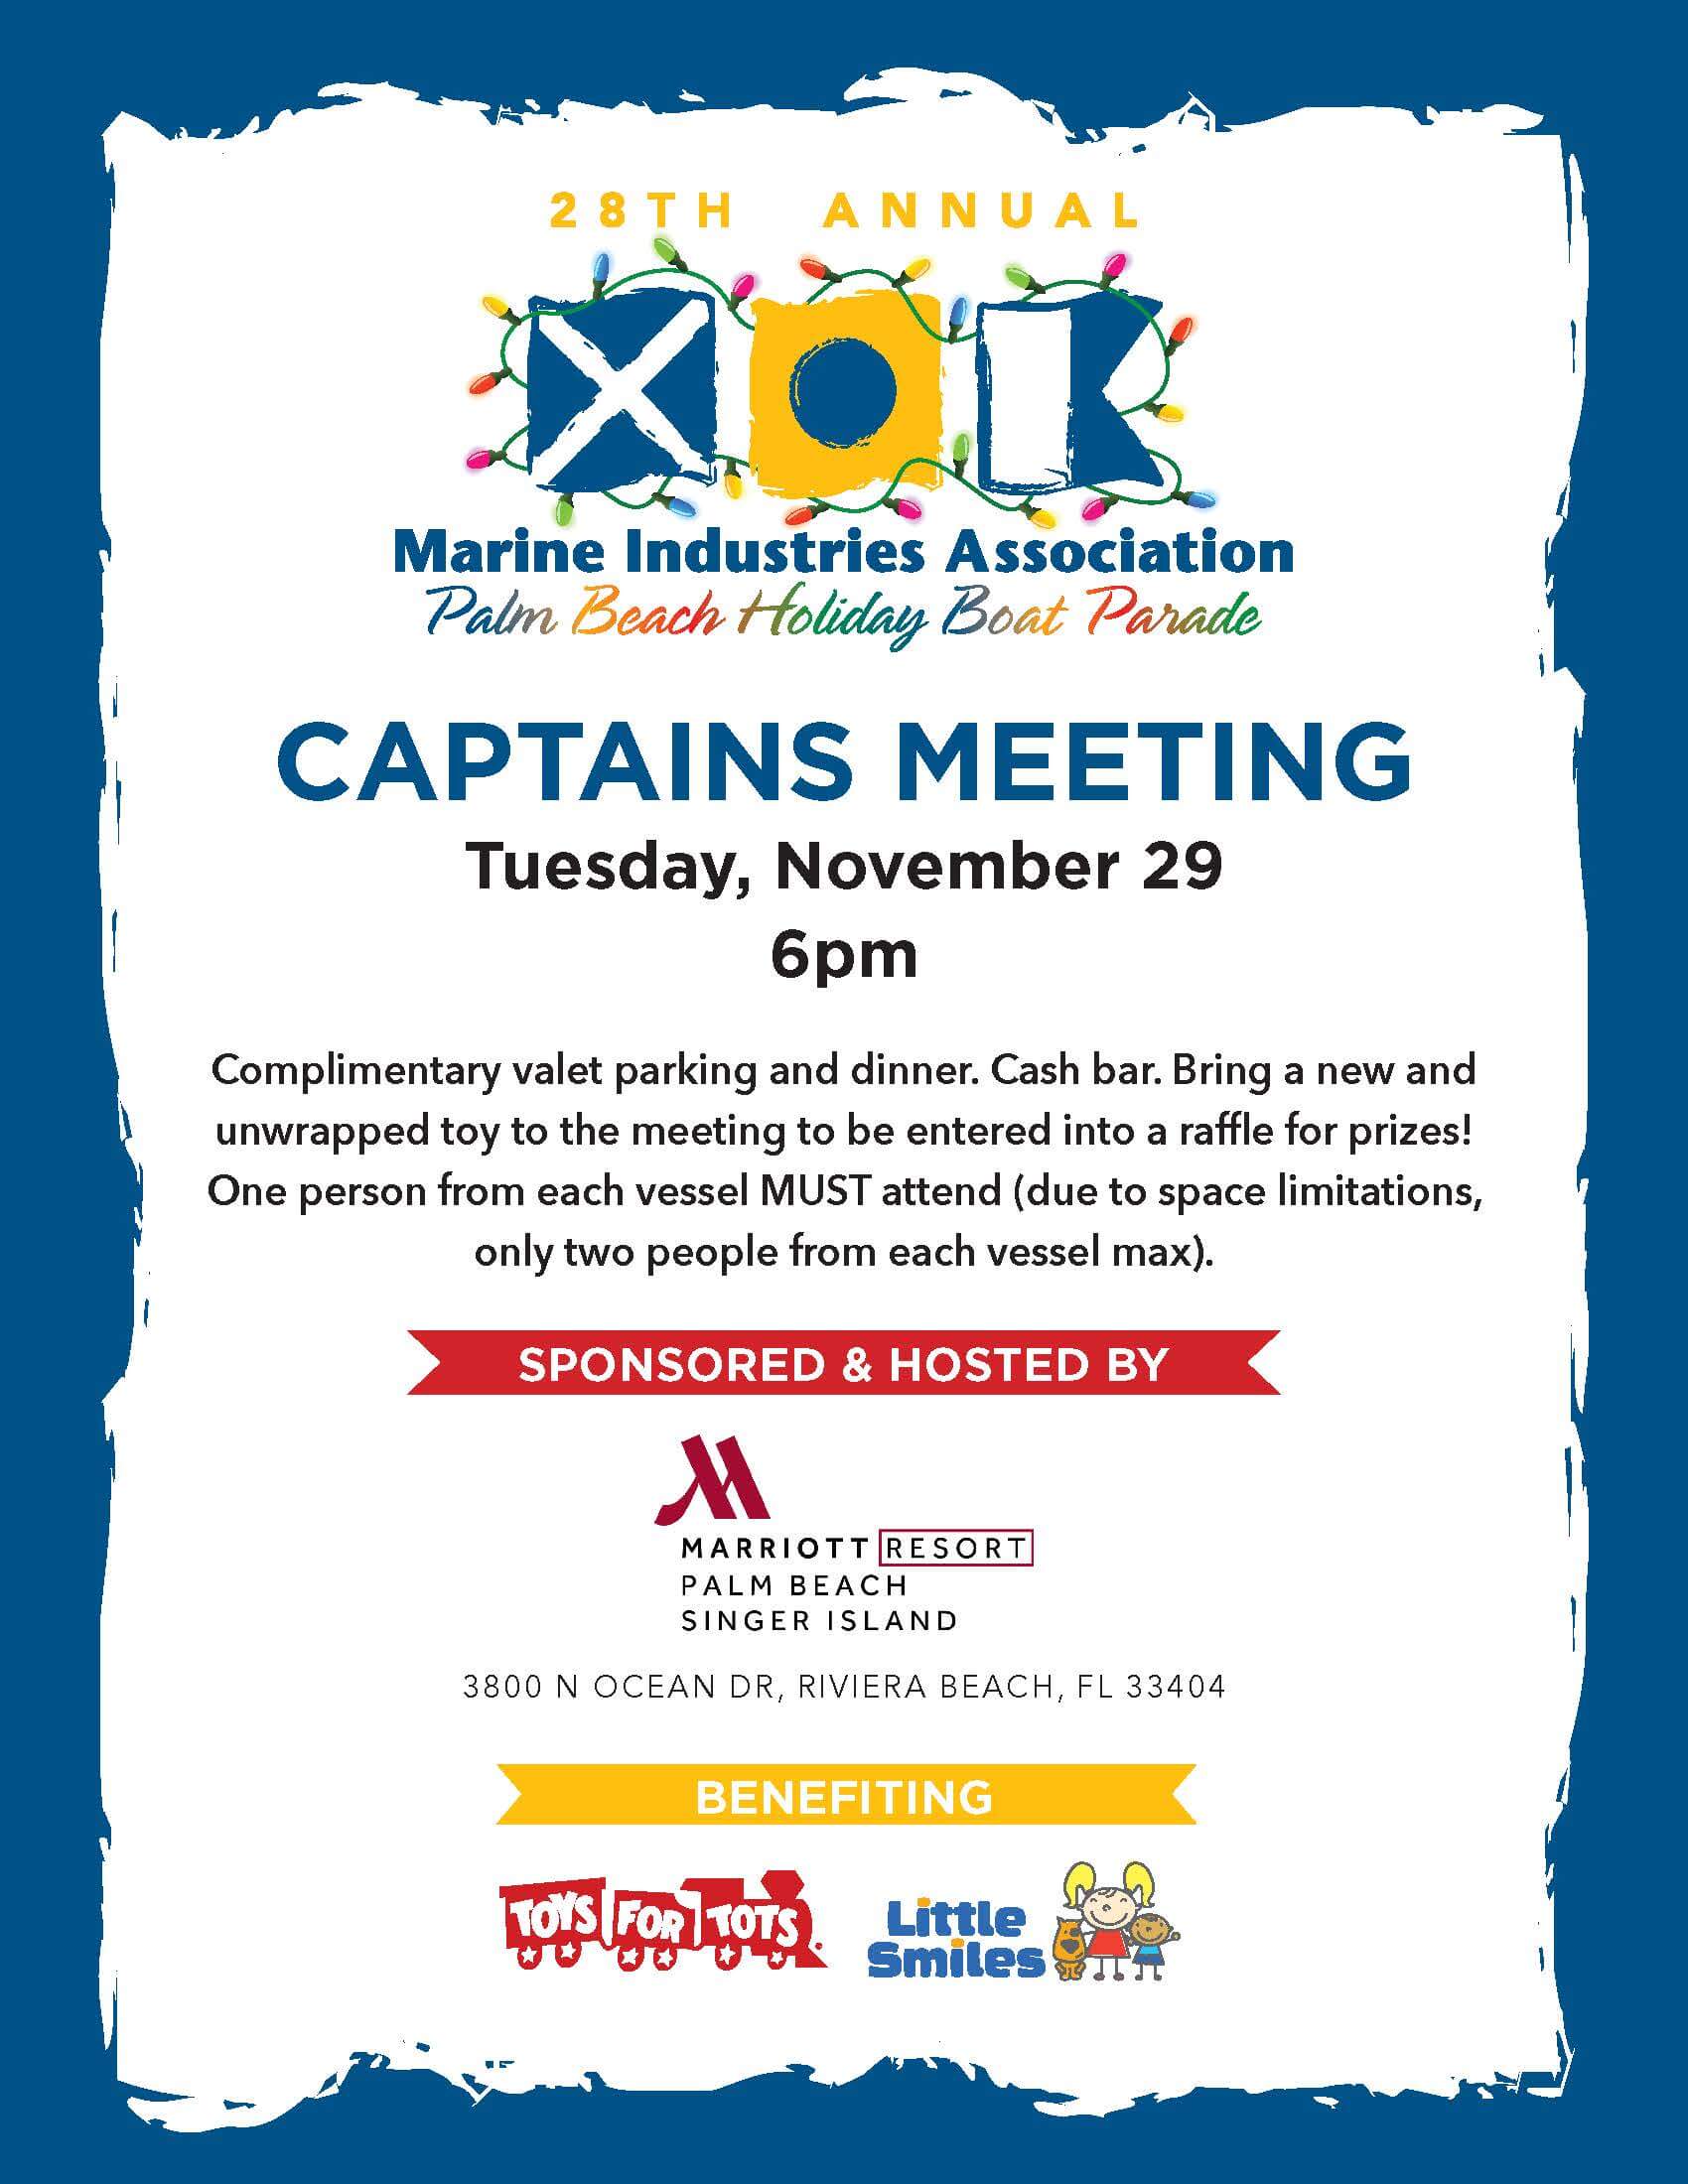 Captains meeting flyer